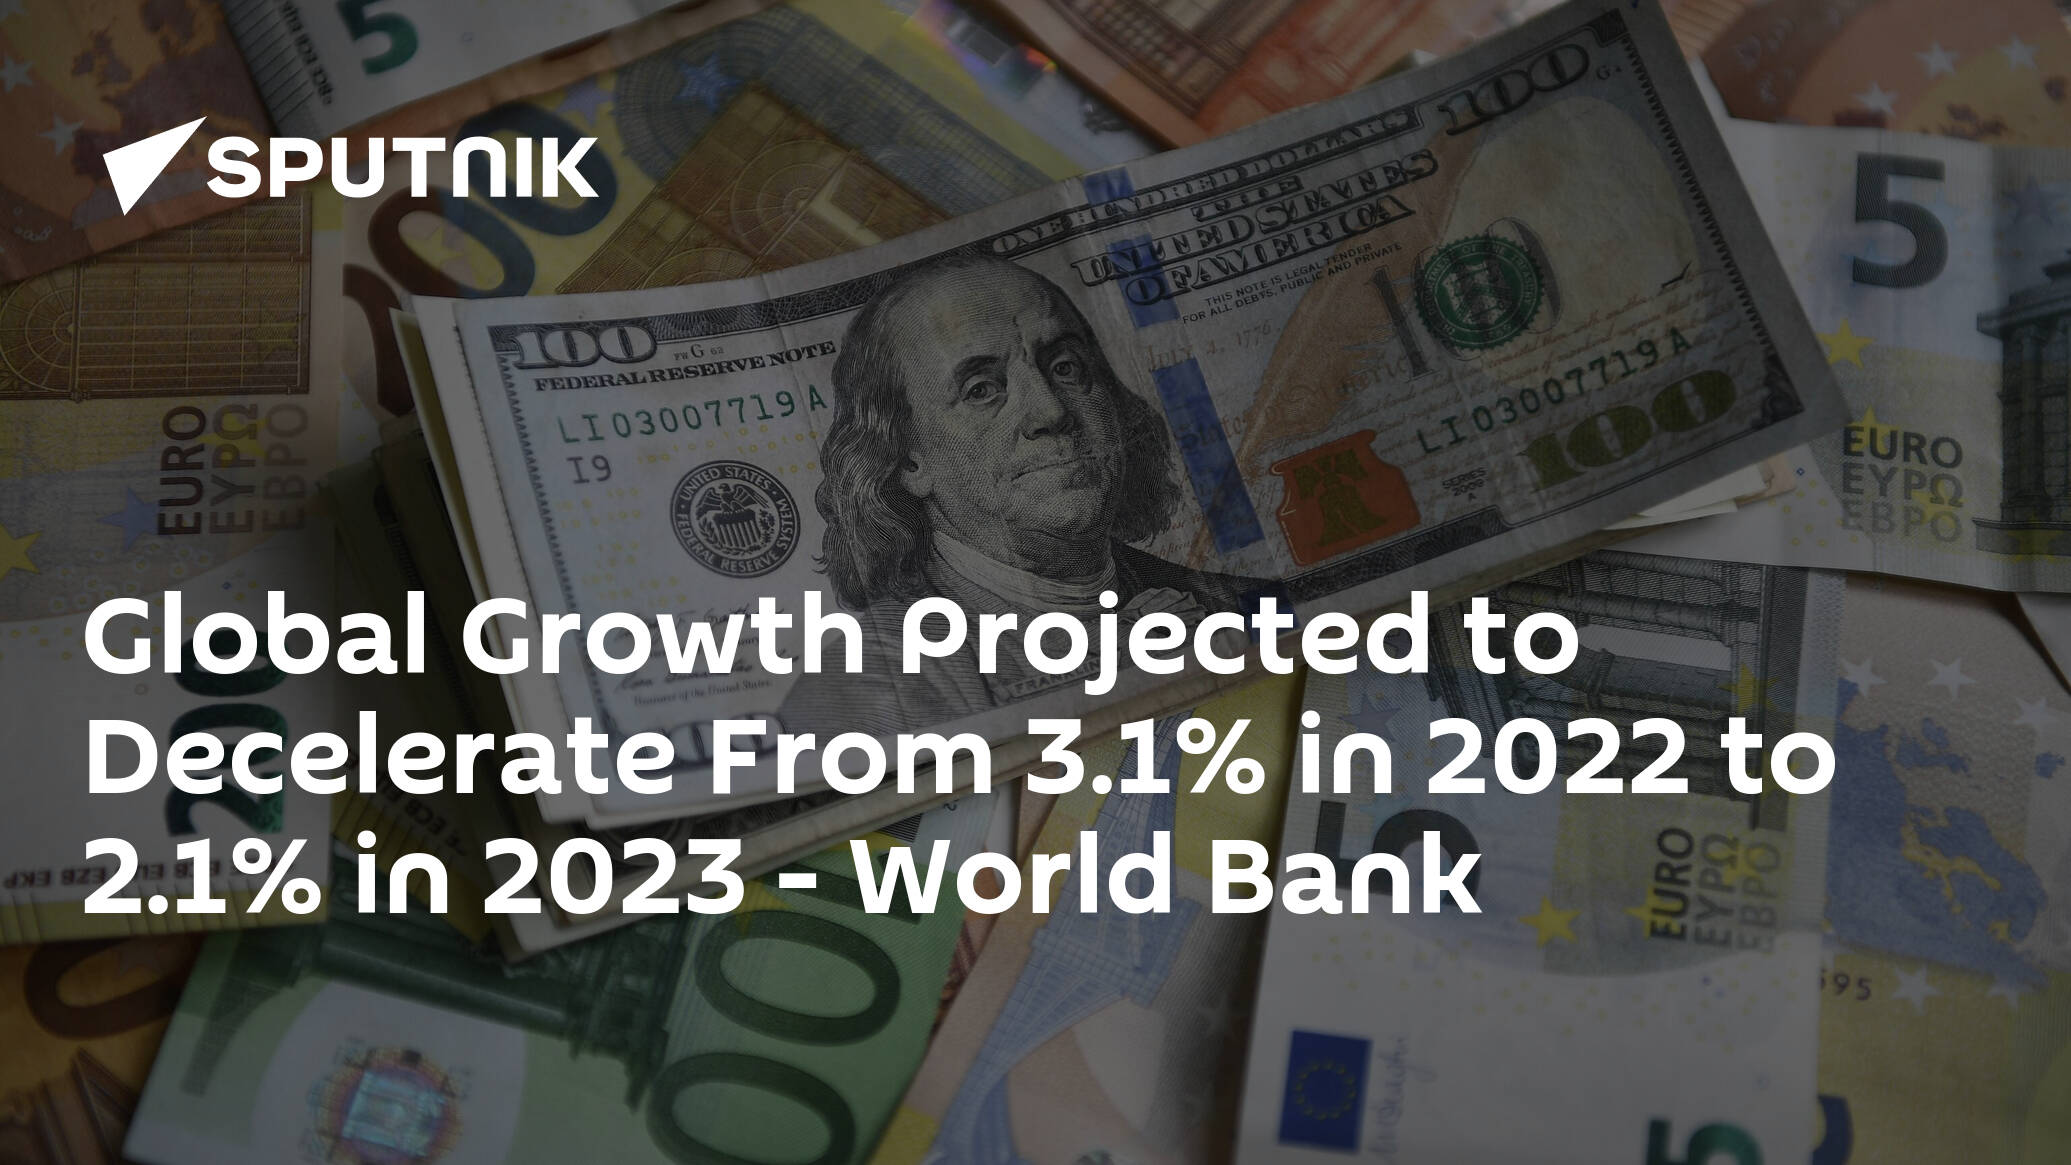 Global Growth Projected to Decelerate From 3.1% in 2022 to 2.1% in 2023 – World Bank